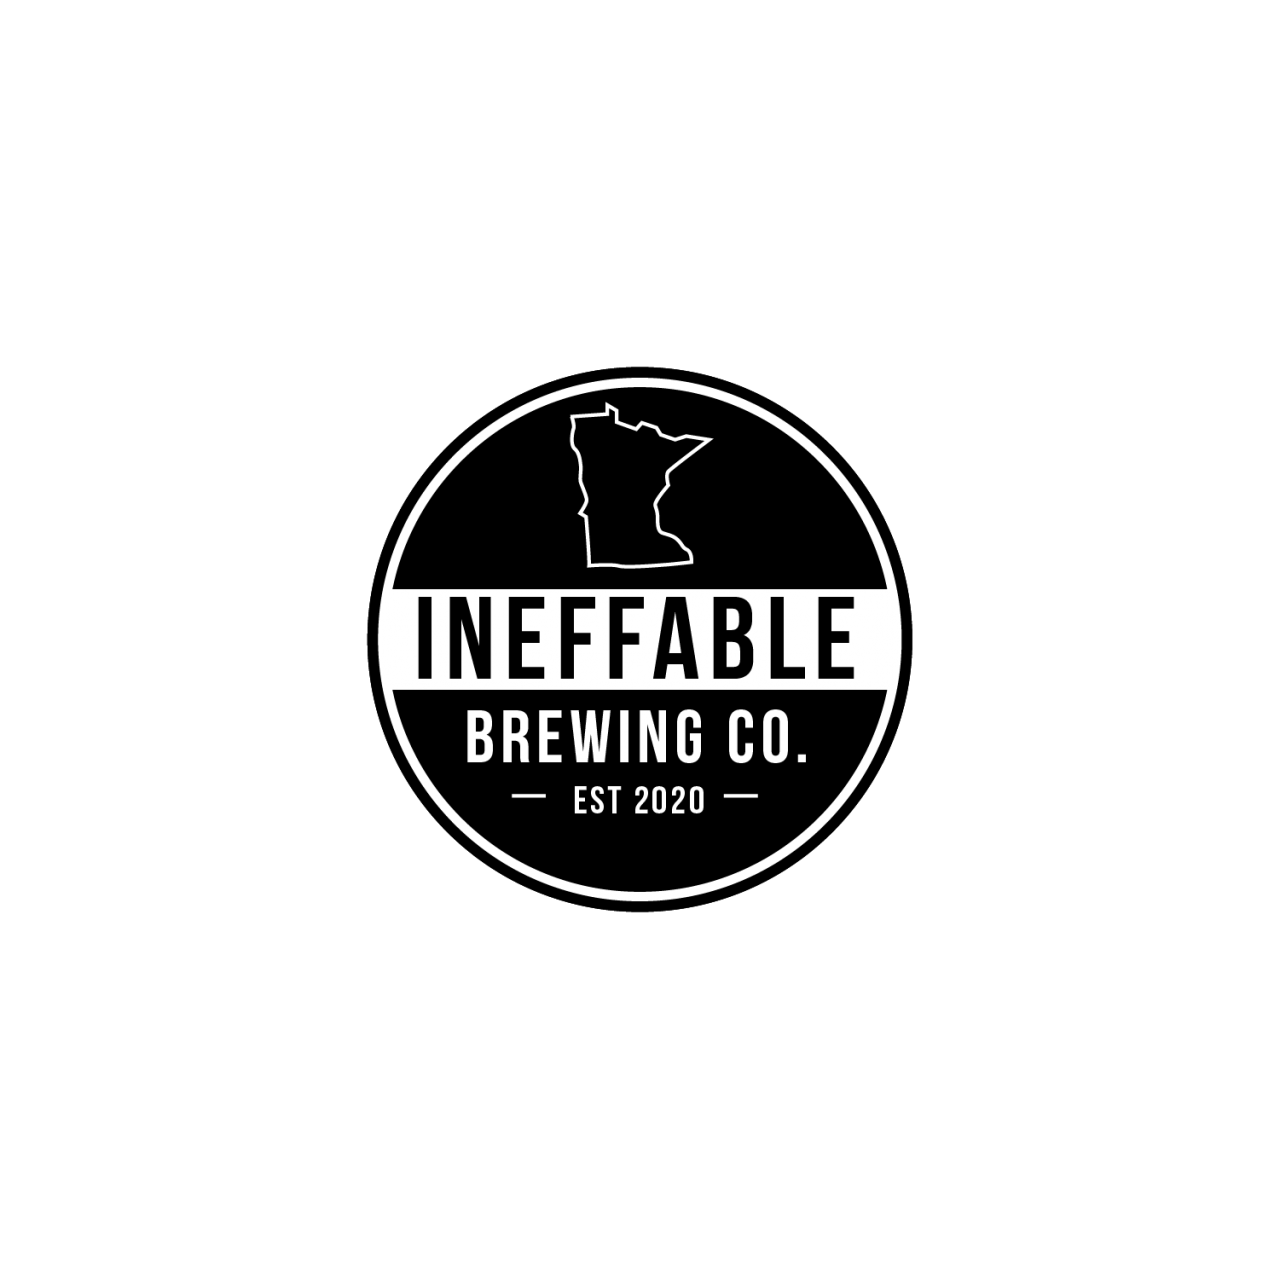 https://www.mncraftbrew.org/wp-content/uploads/2021/06/Ineffable-Brewing-Co-1280x1279.png